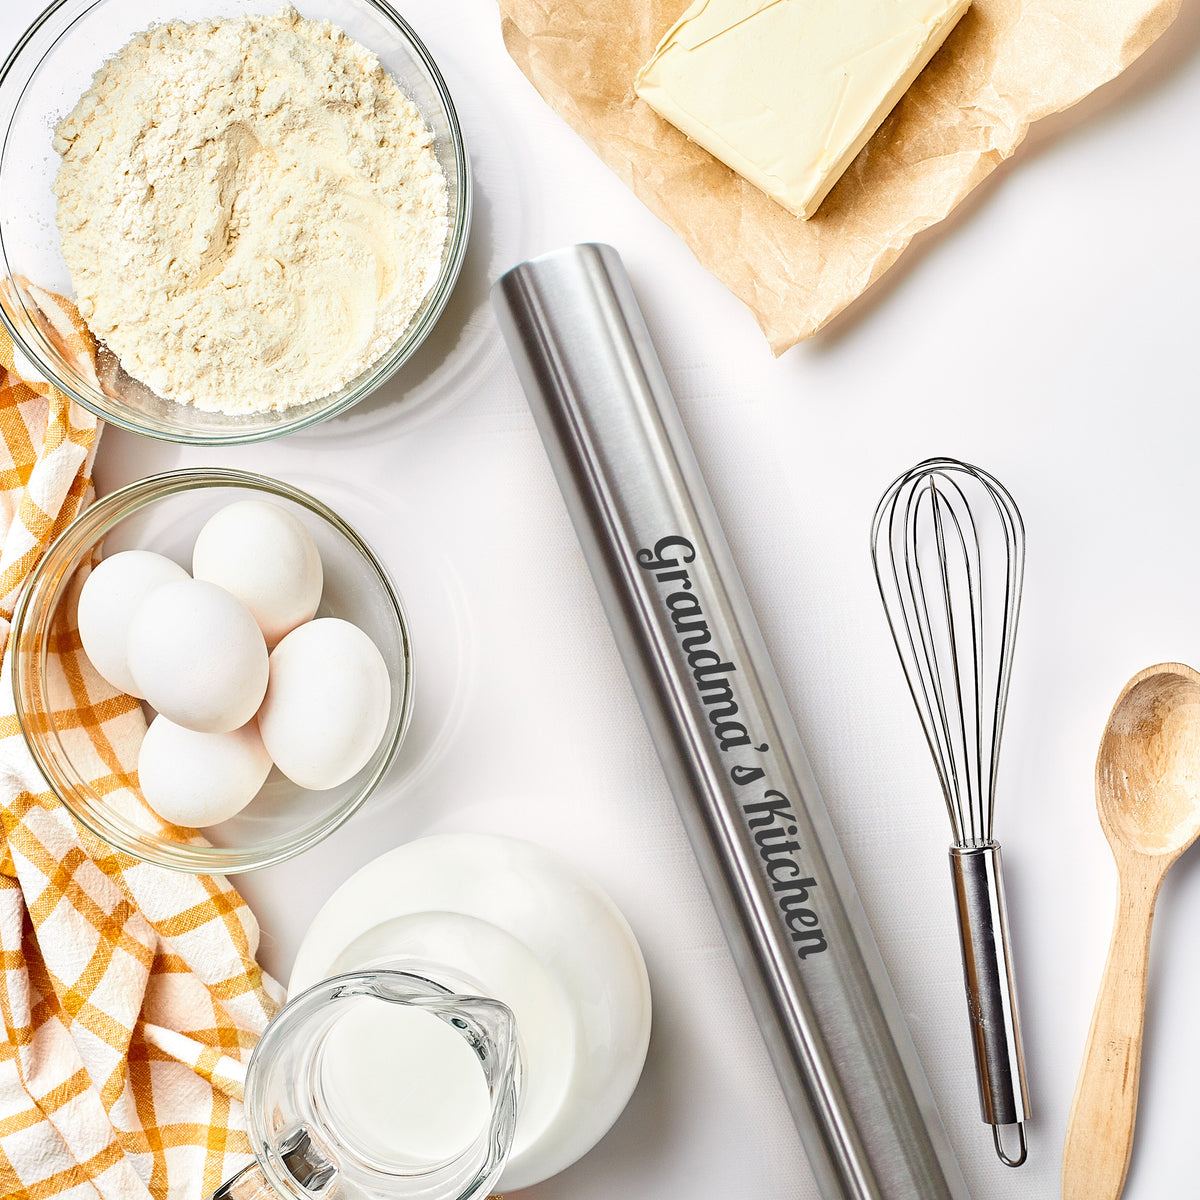 Stainless Steel Rolling Pin - Bakers Rolling Pin - Personalize